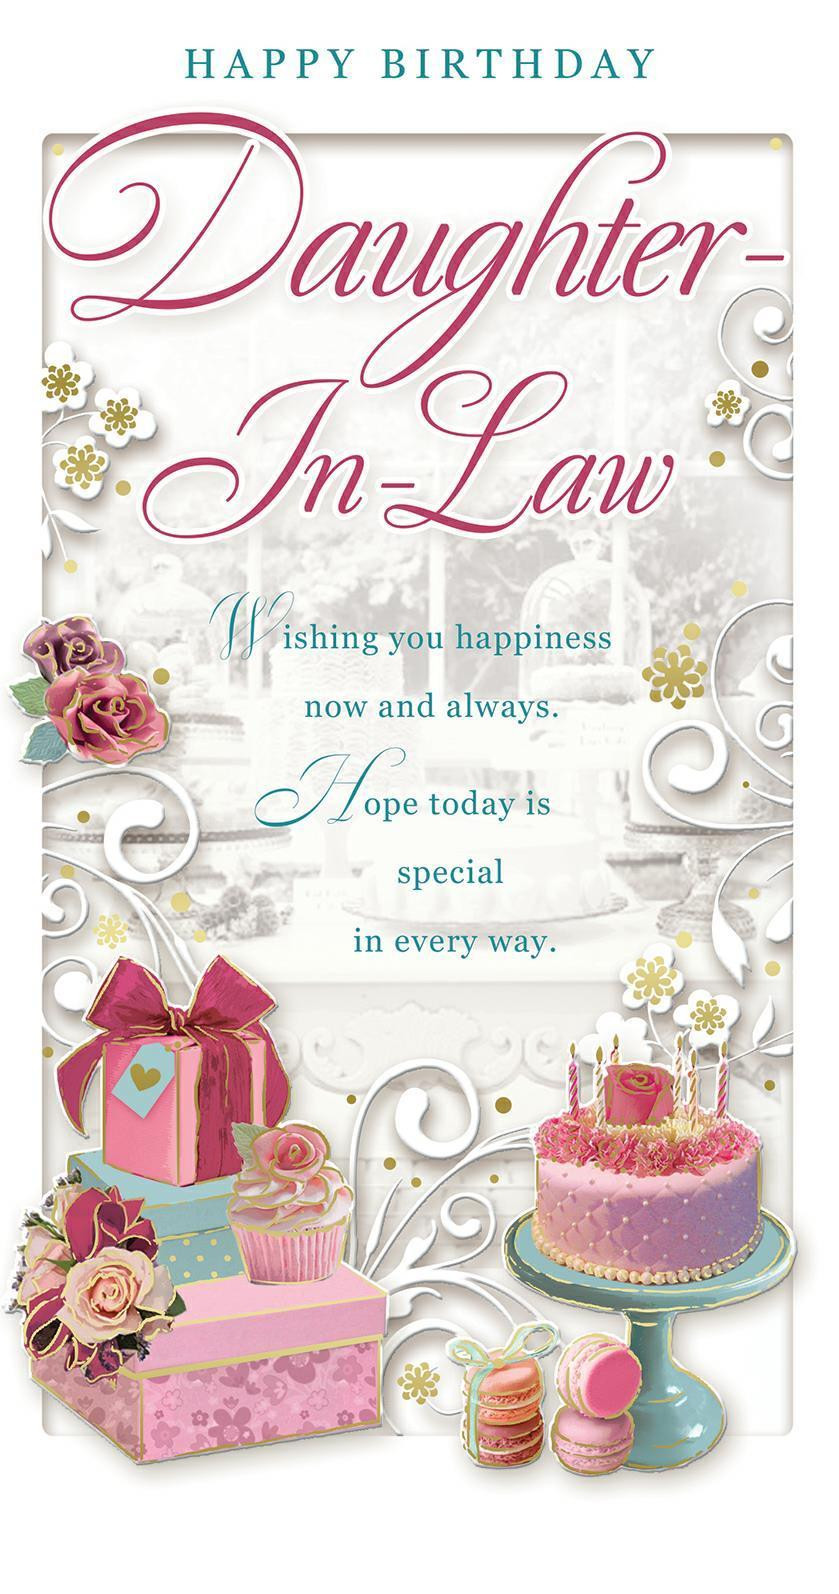 Happy Birthday Quotes For Daughter In Law
 HAPPY BIRTHDAY DAUGHTER IN LAW CARD CUPCAKE ROSES GIFTS